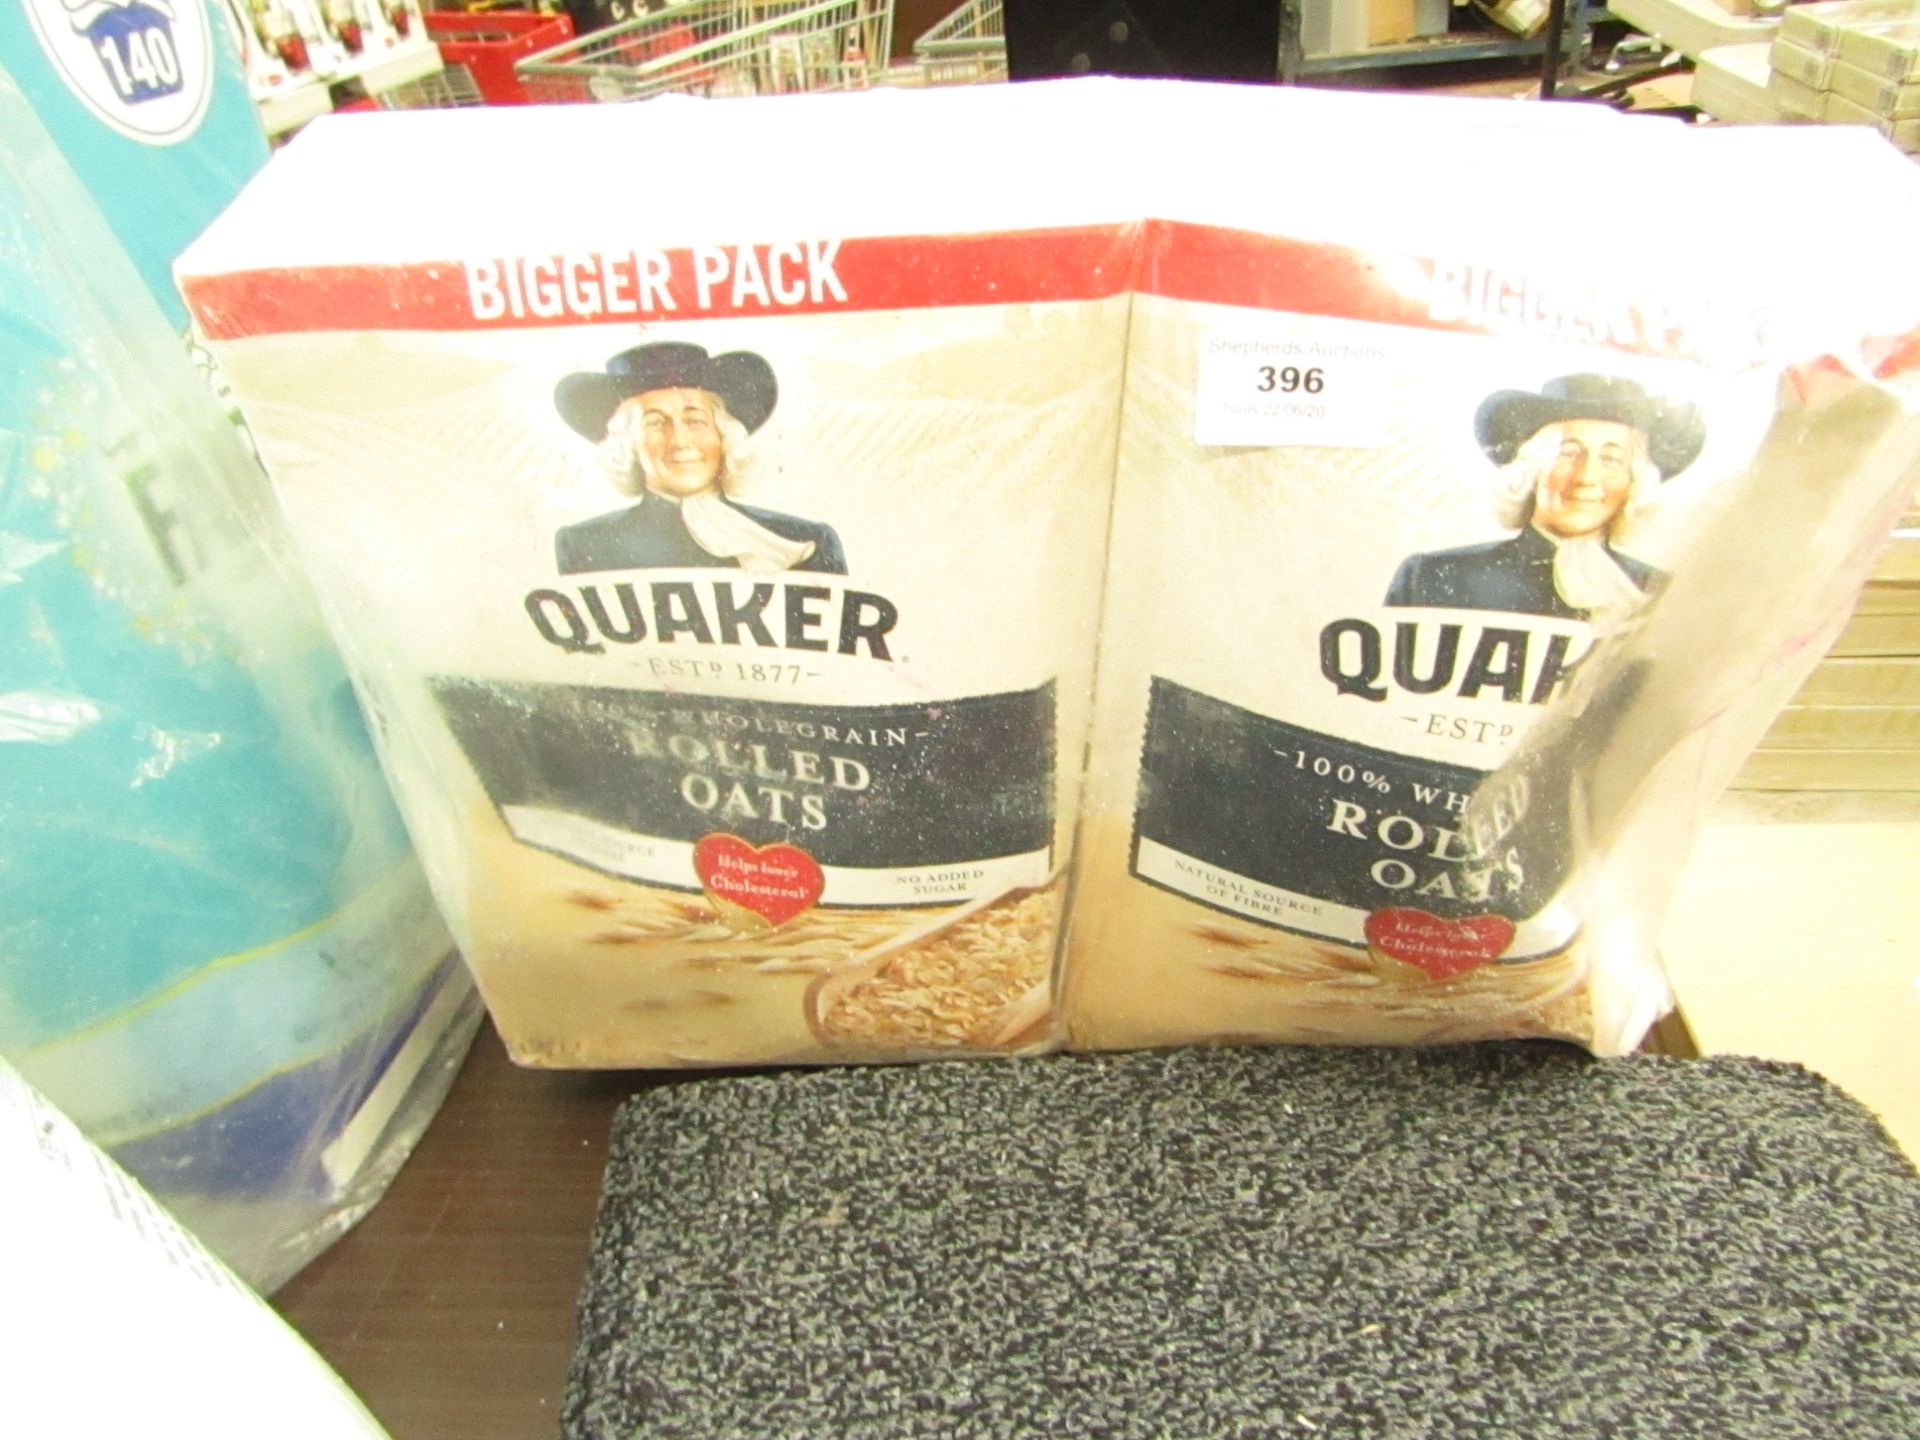 2 x 1.5kg Quaker Rolled Oats. Boxes are slightly damaged but product is fine. BB 10/4/21